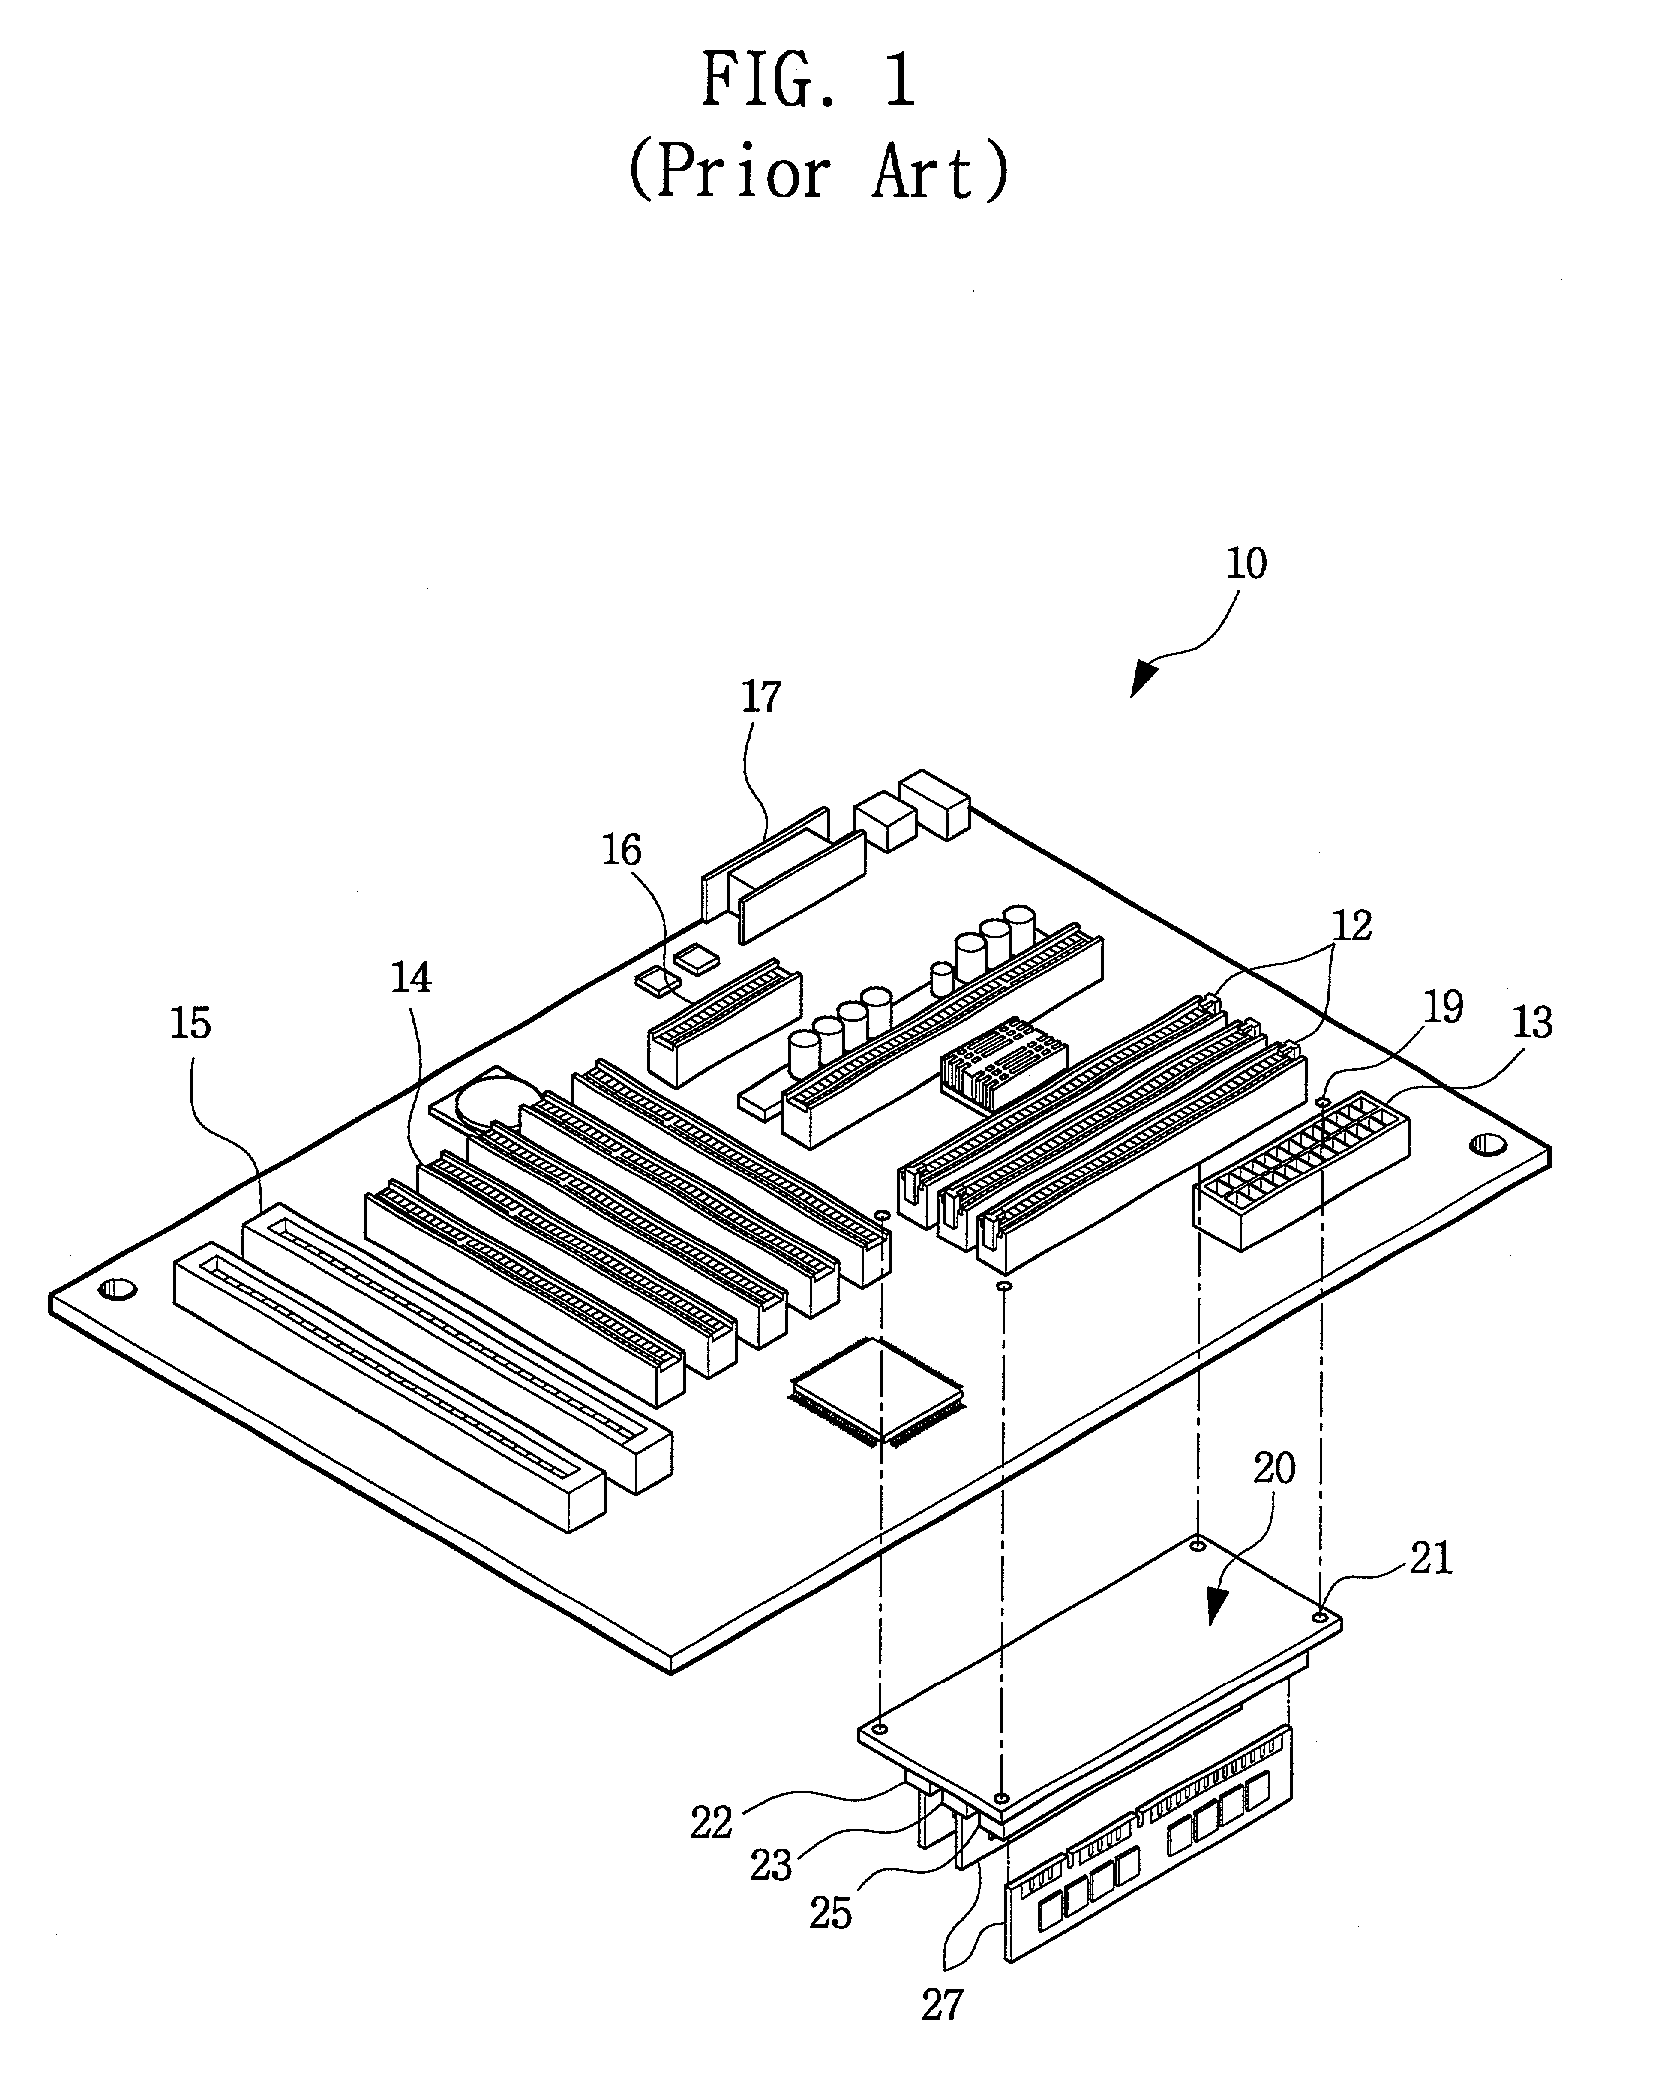 Parallel test board used in testing semiconductor memory devices